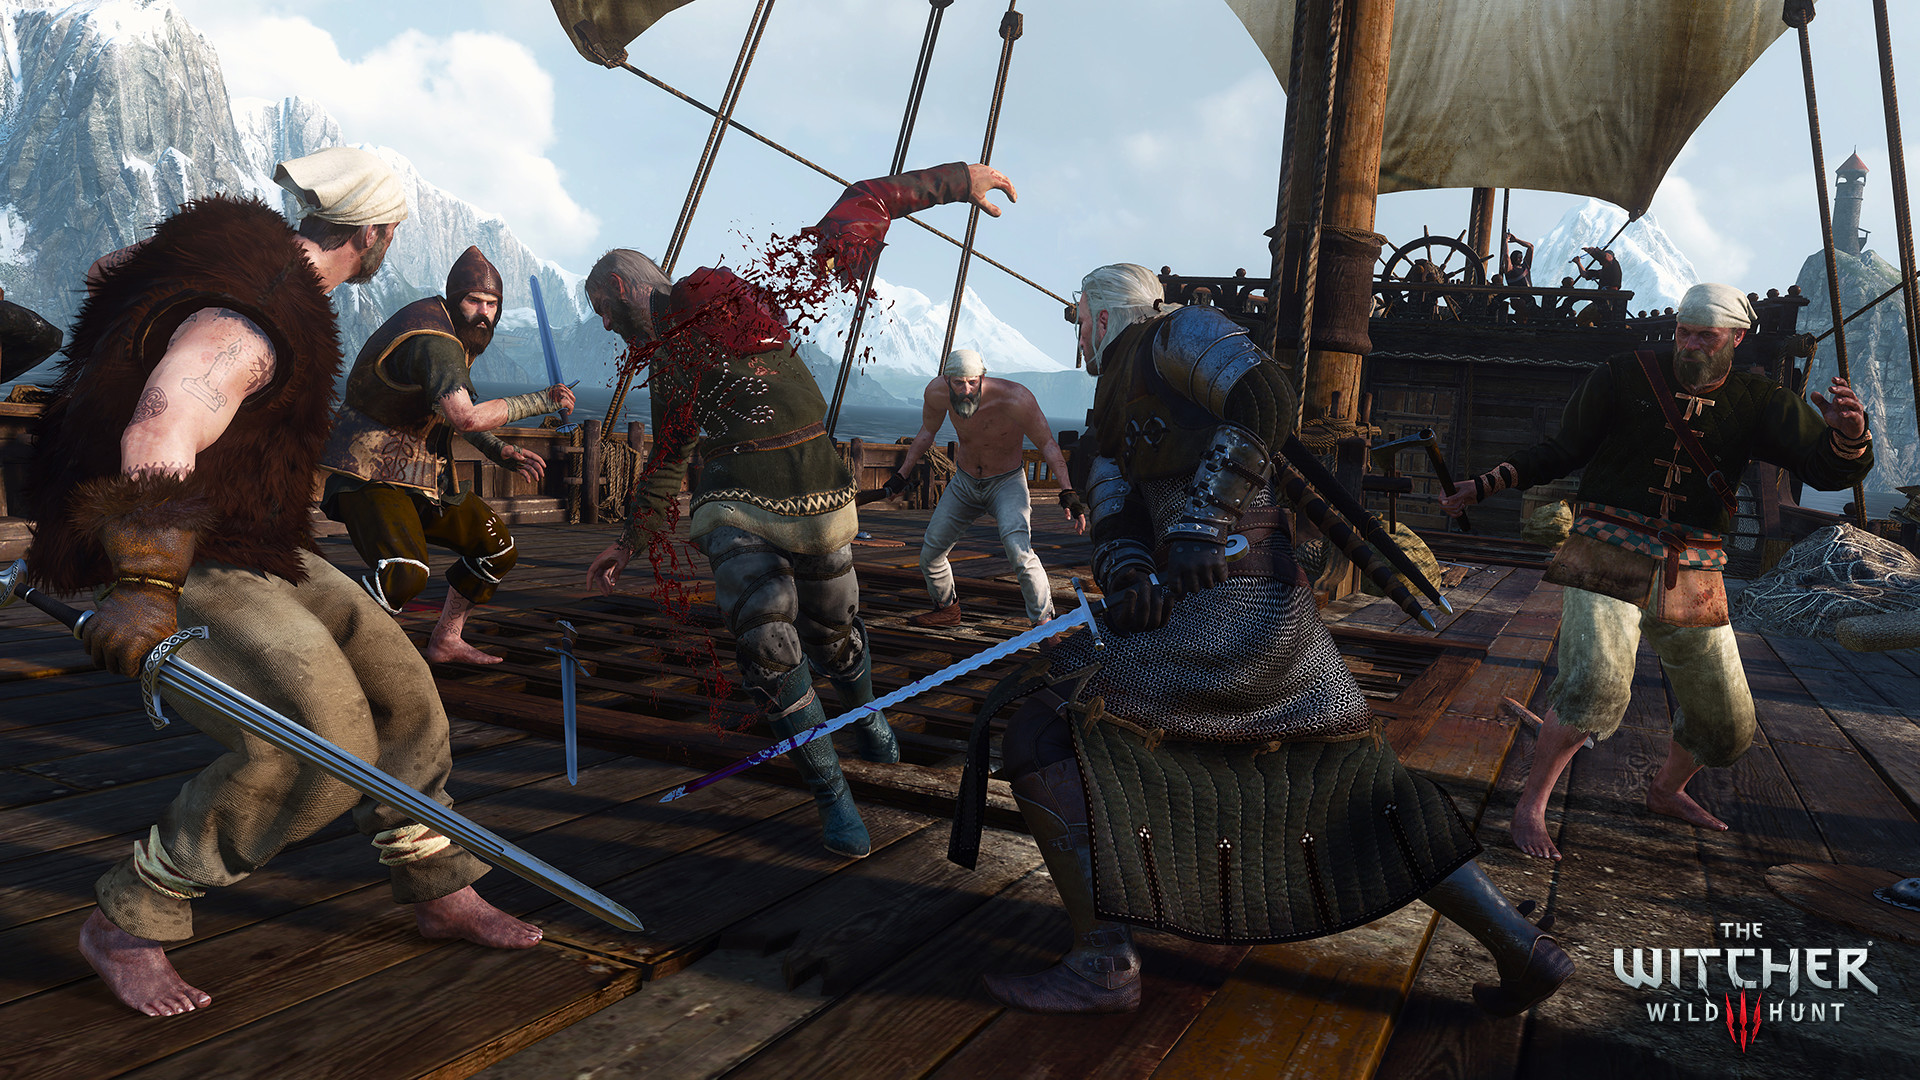 The witcher 3 wild hunt fight